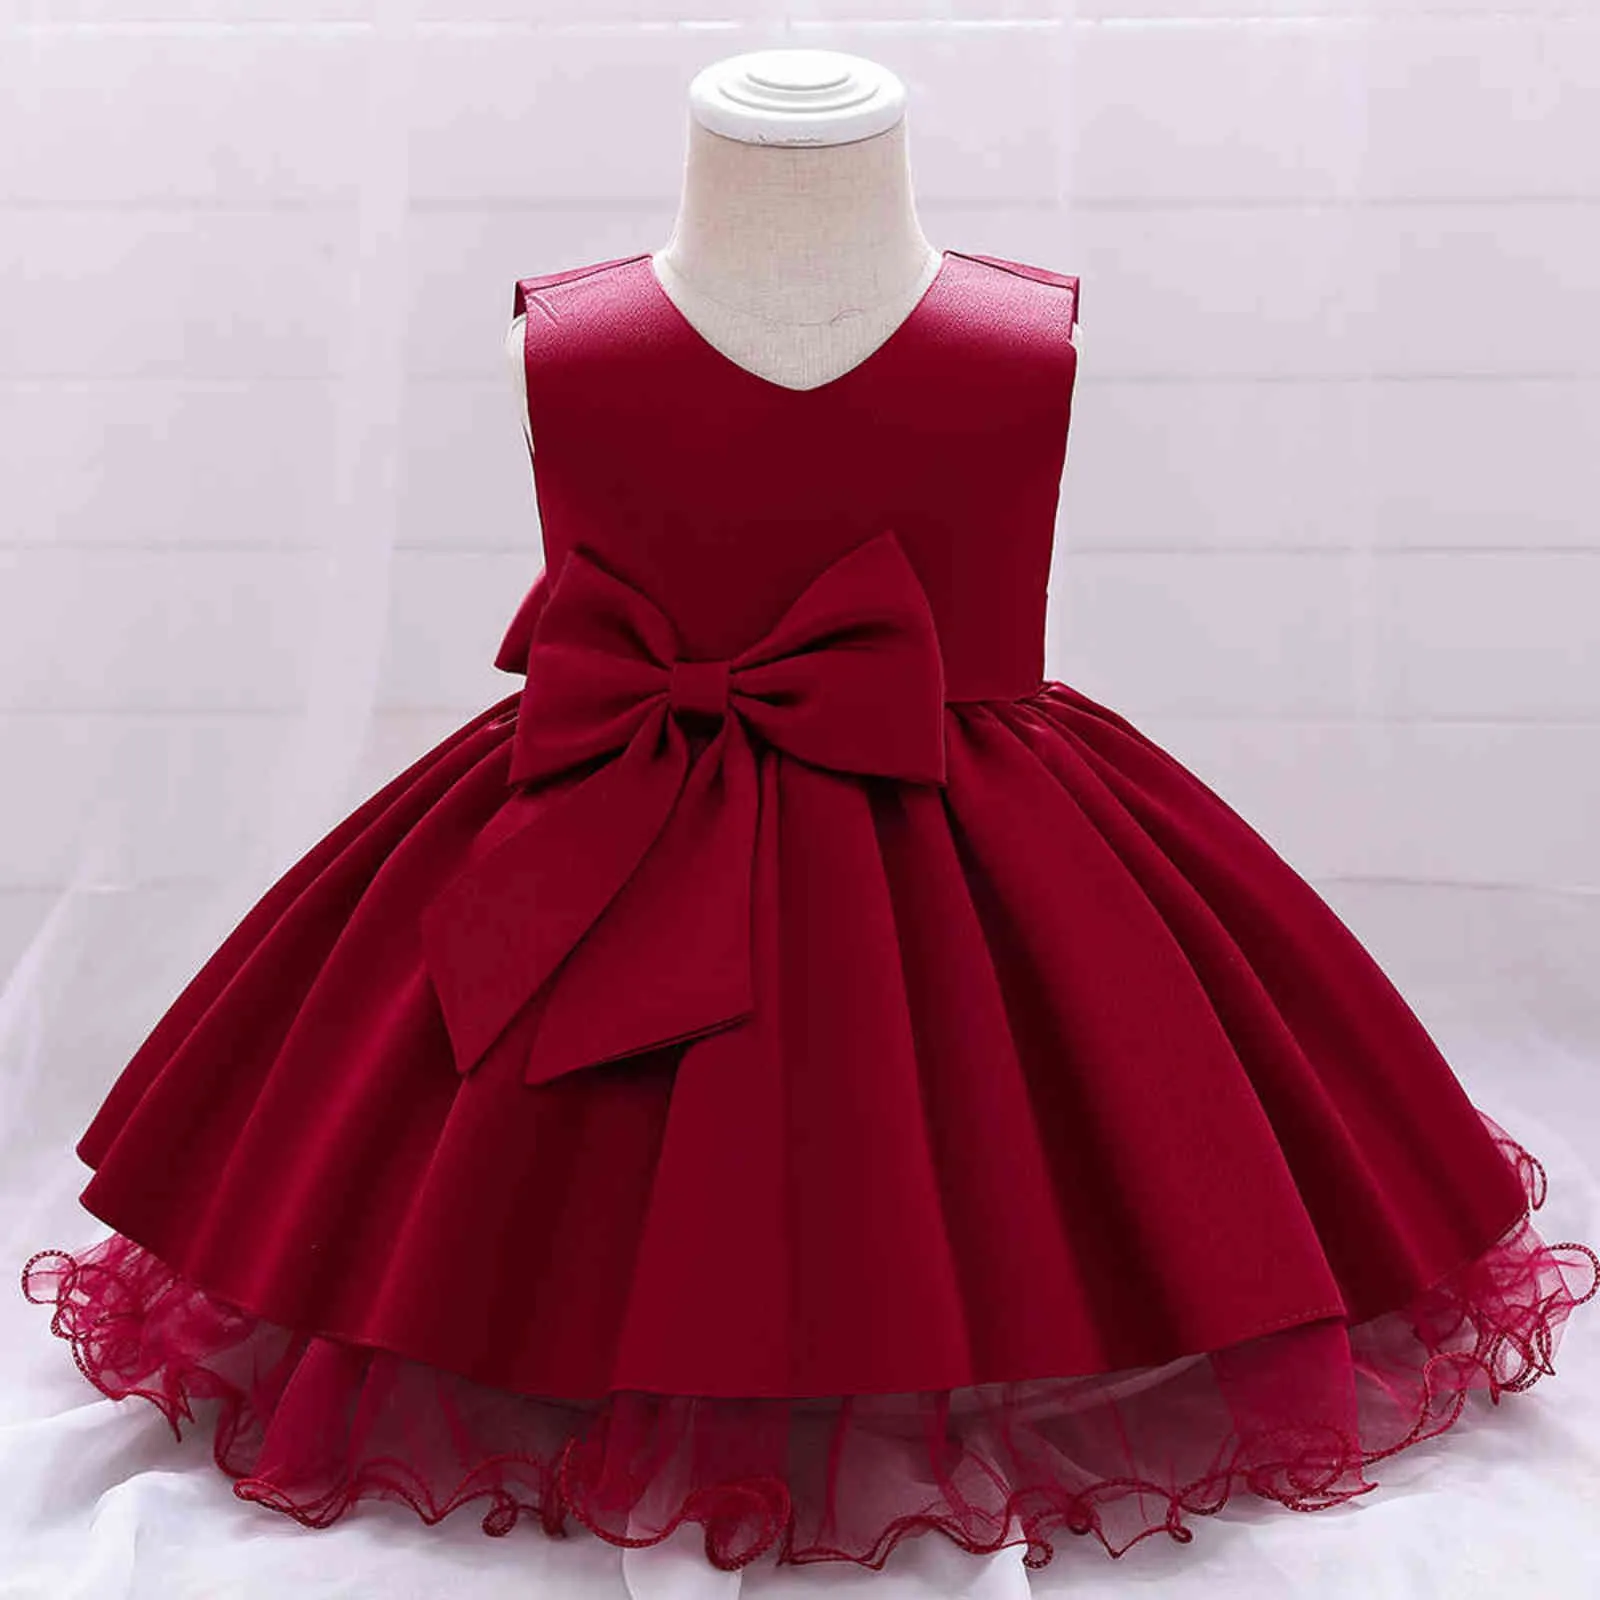 2021 Infant Bow Dress Newborn Kids Clothes Costumes Baby Princess Party Wedding Dresses For Baby Girls 1st Year Birthday Dress G1129